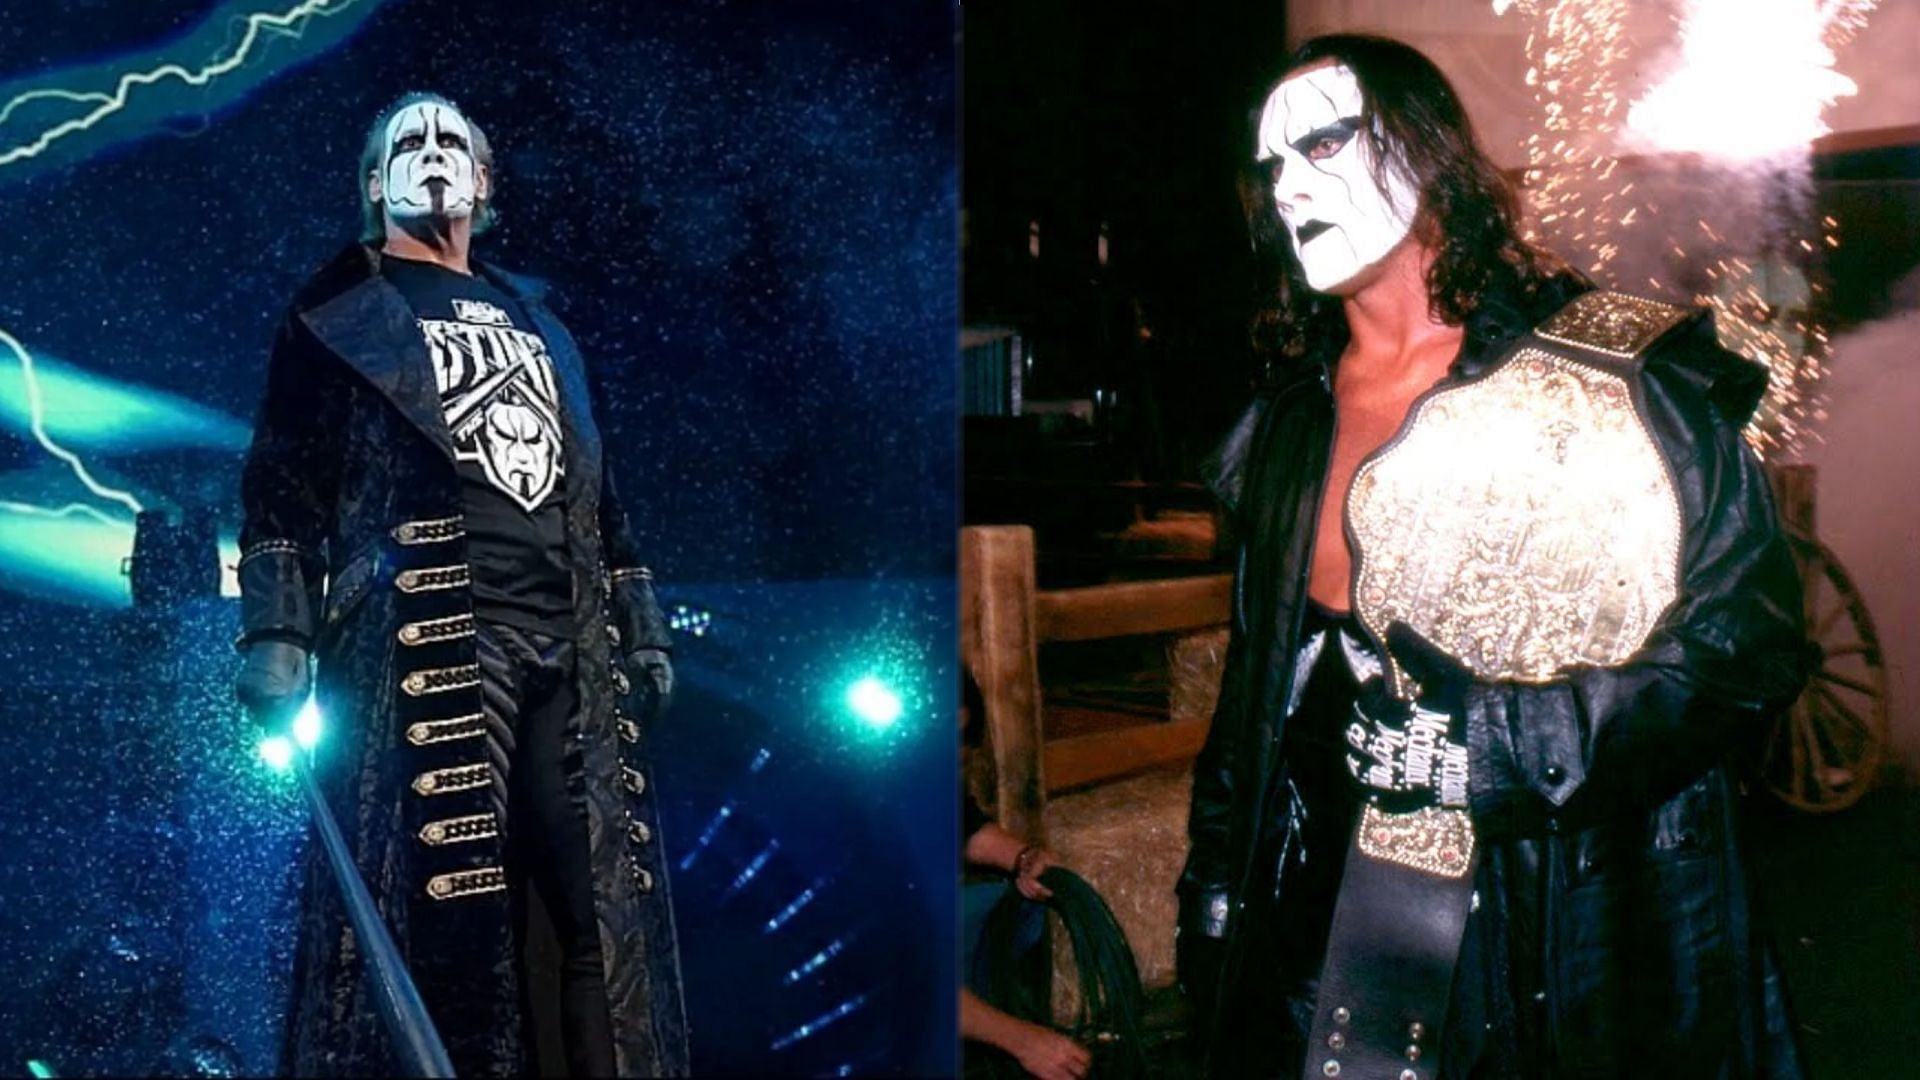 Sting is considered a legend of the wrestling industry.